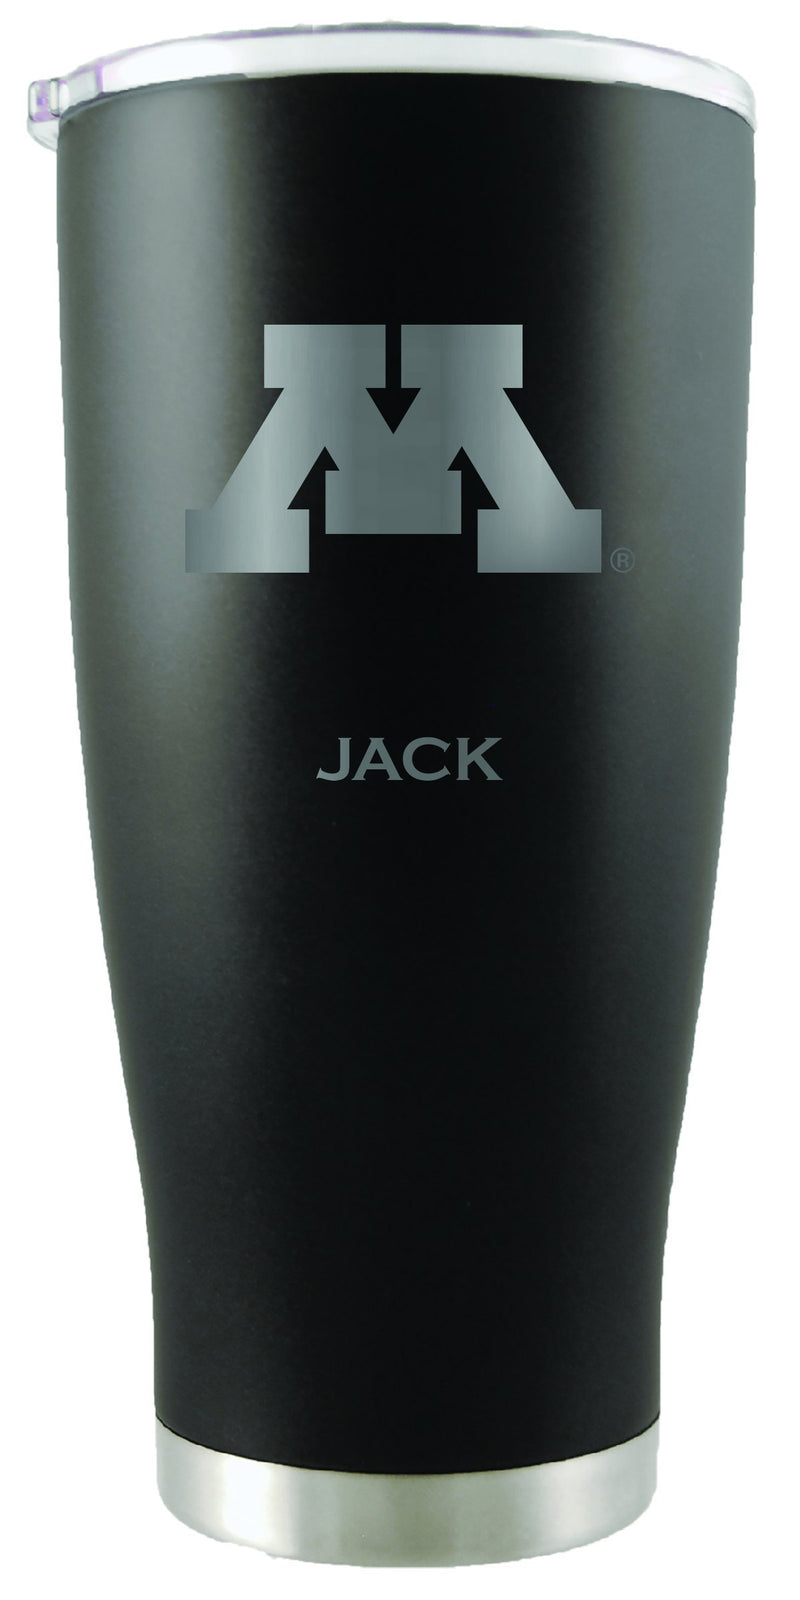 20oz Black Personalized Stainless Steel Tumbler | Minnesota
COL, CurrentProduct, Drinkware_category_All, MIN, Minnesota Golden Gophers, Personalized_Personalized
The Memory Company